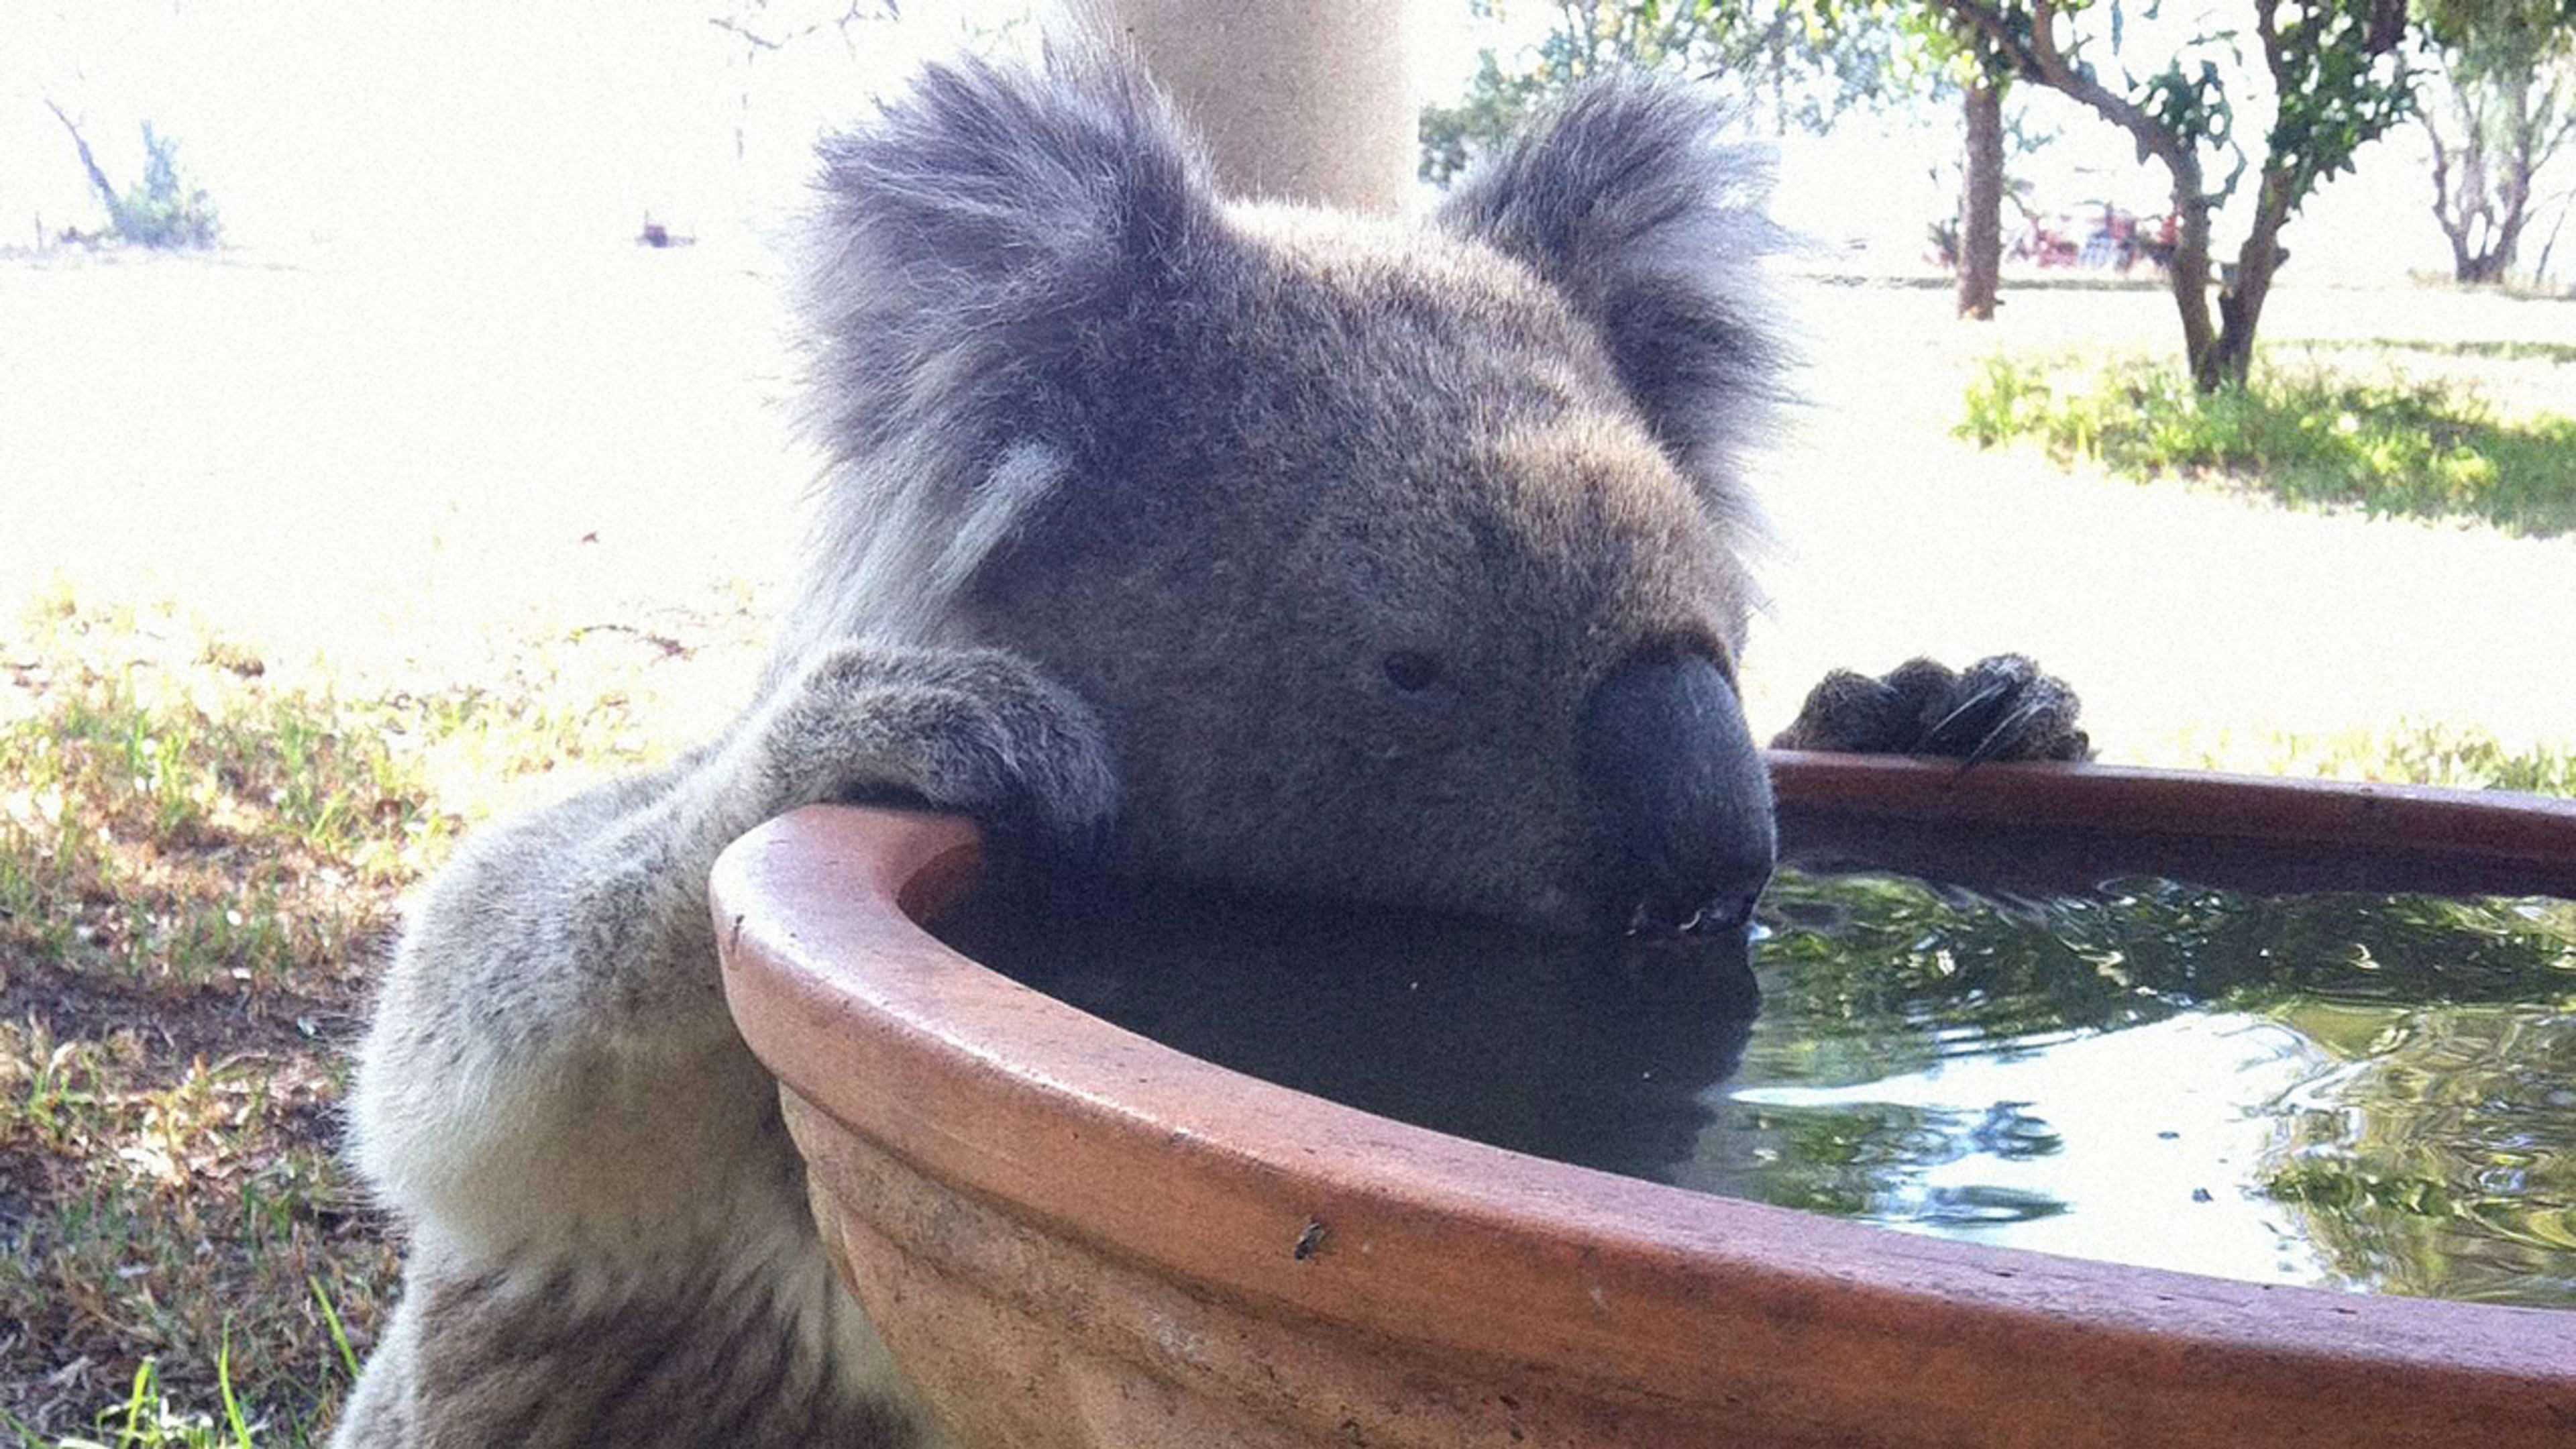 These adorable koala drinking fountains will help them hydrate as Australia heats up